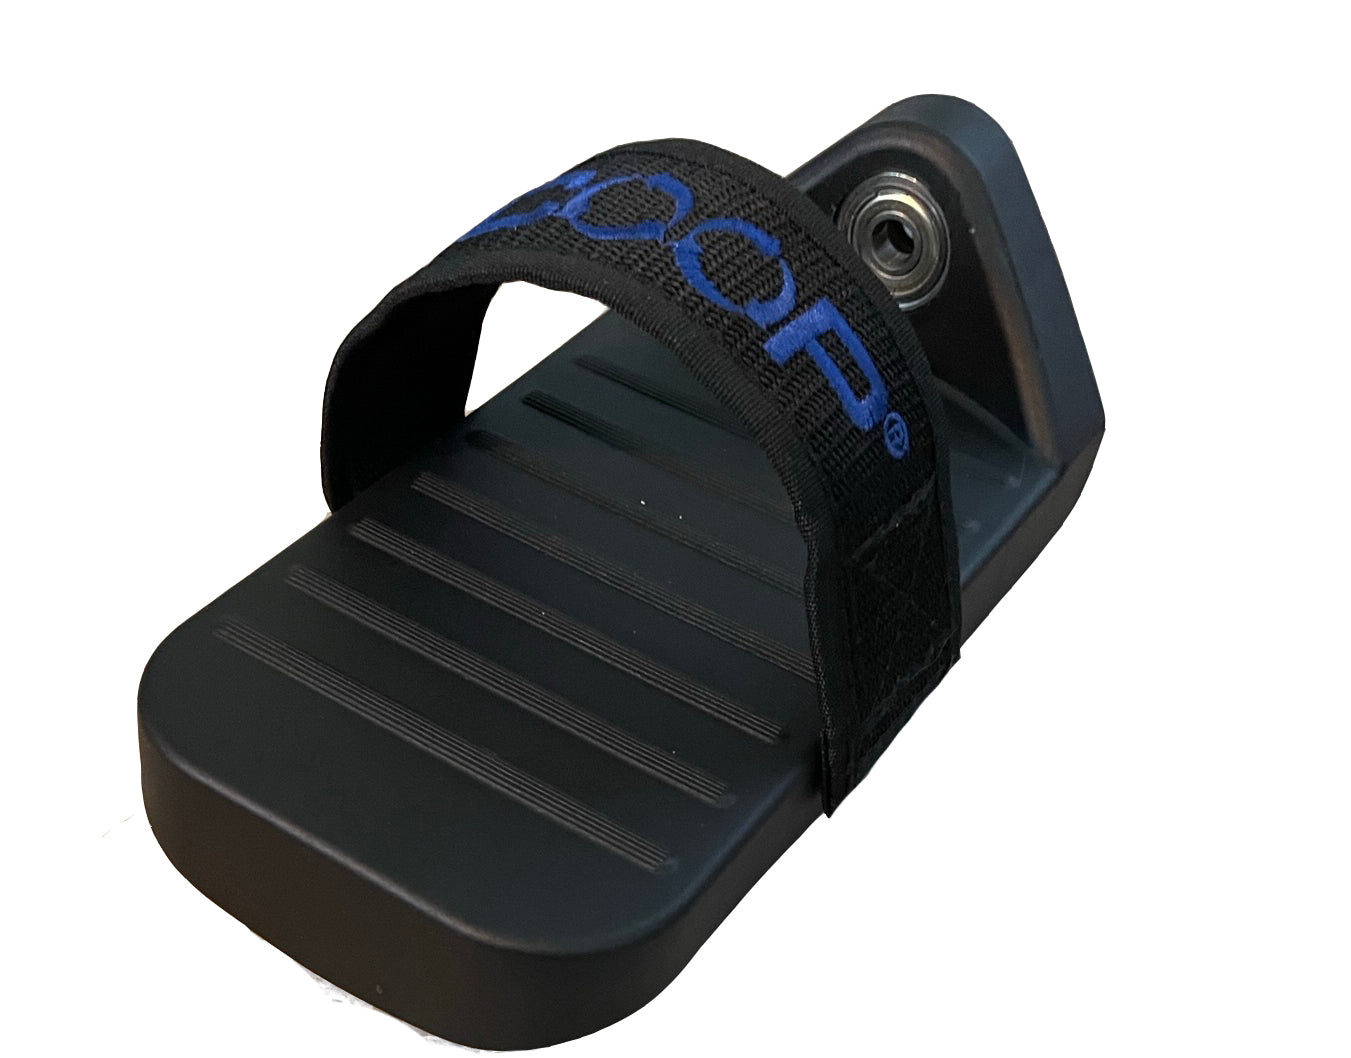 Pedal Option for Scoop®:  One Pair Standard Sized Pedals with Adjustable Velcro